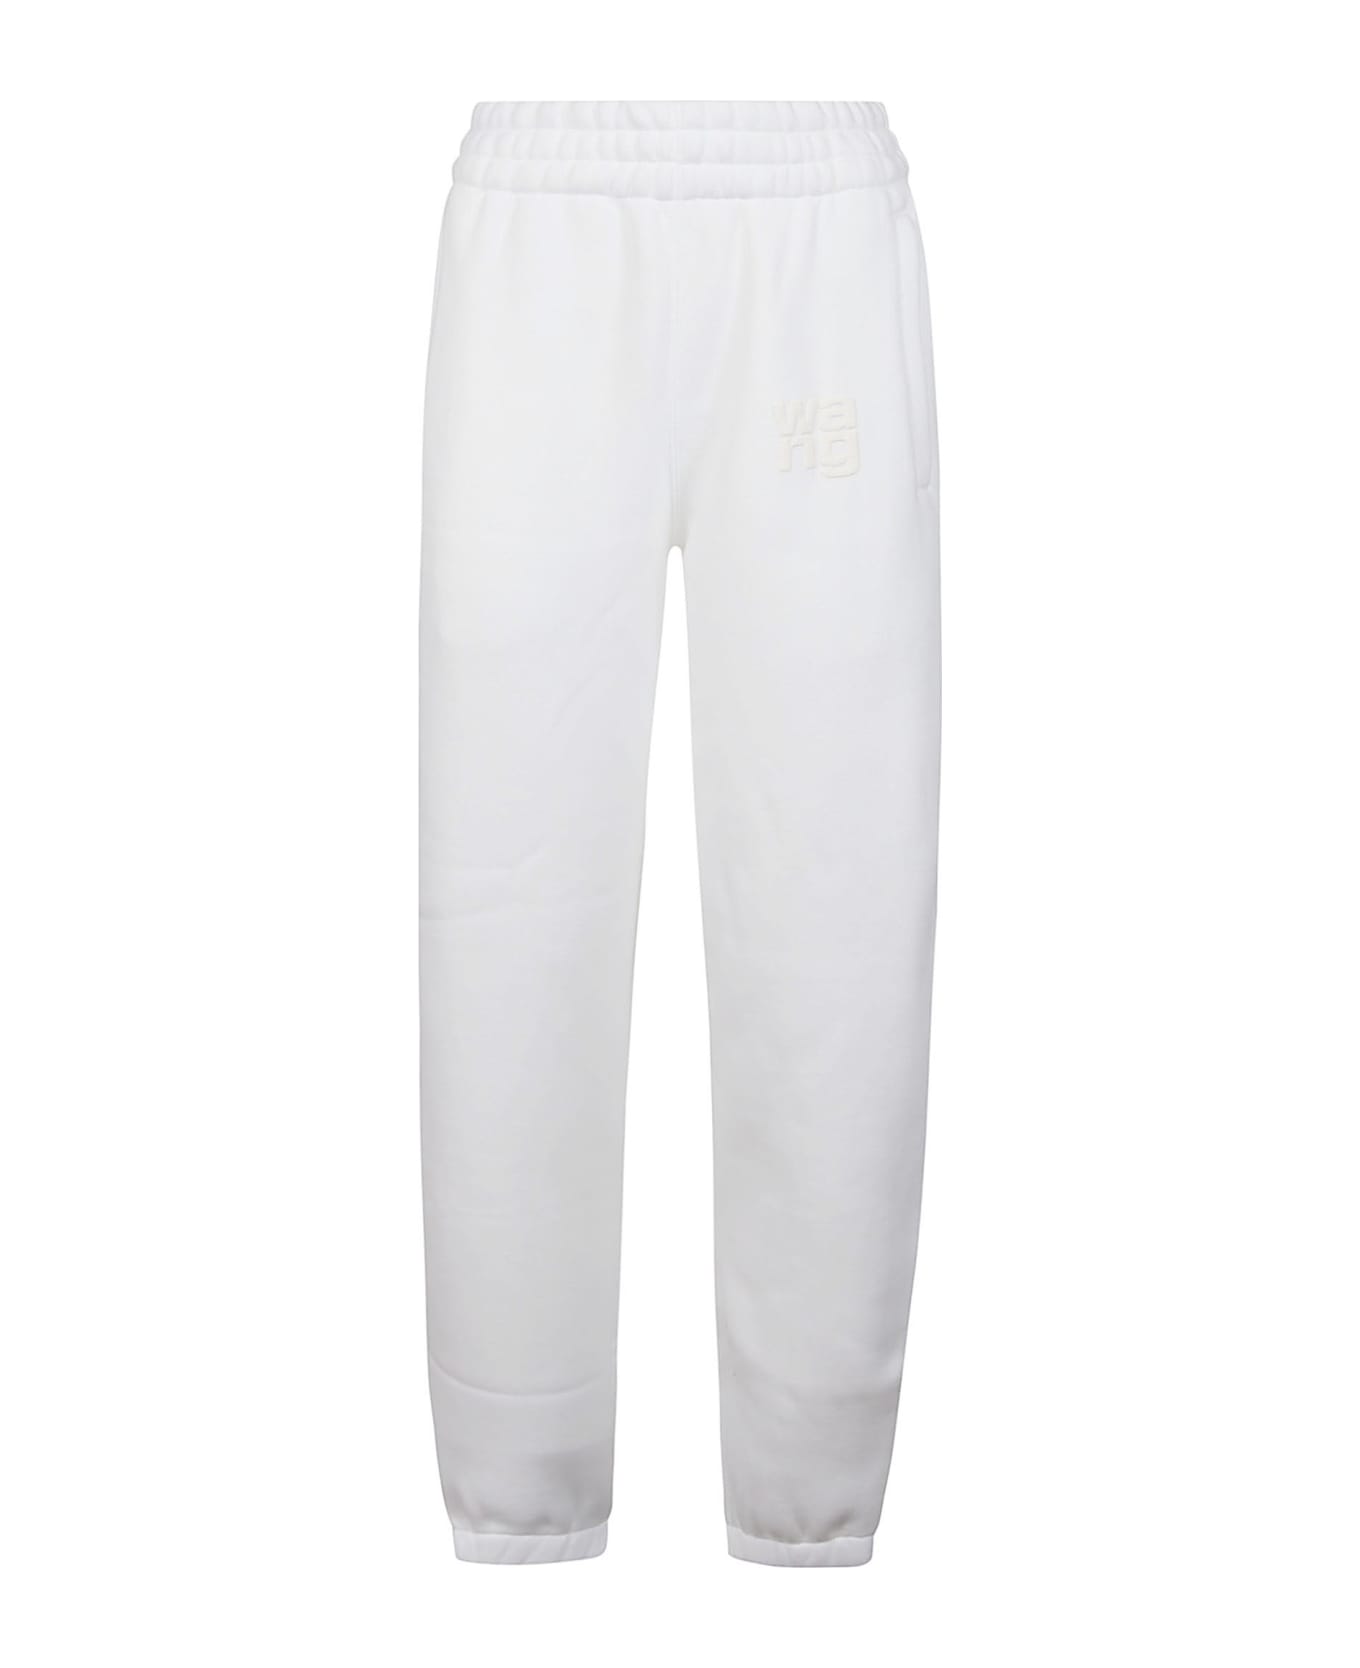 T by Alexander Wang Puff Paint Logo Esential Terry Classic Sweatpant - White